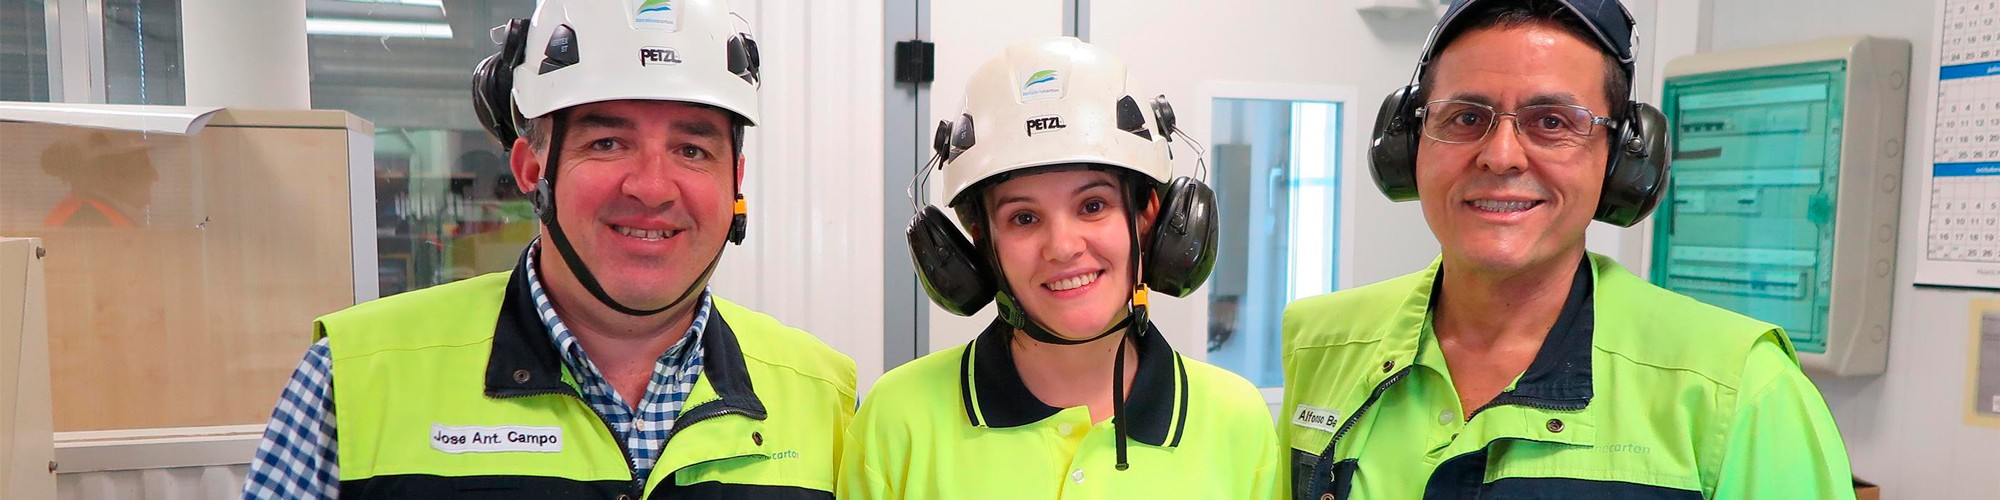 Barcelona Cartonboard personnel happy with Procemex web monitoring and inspection